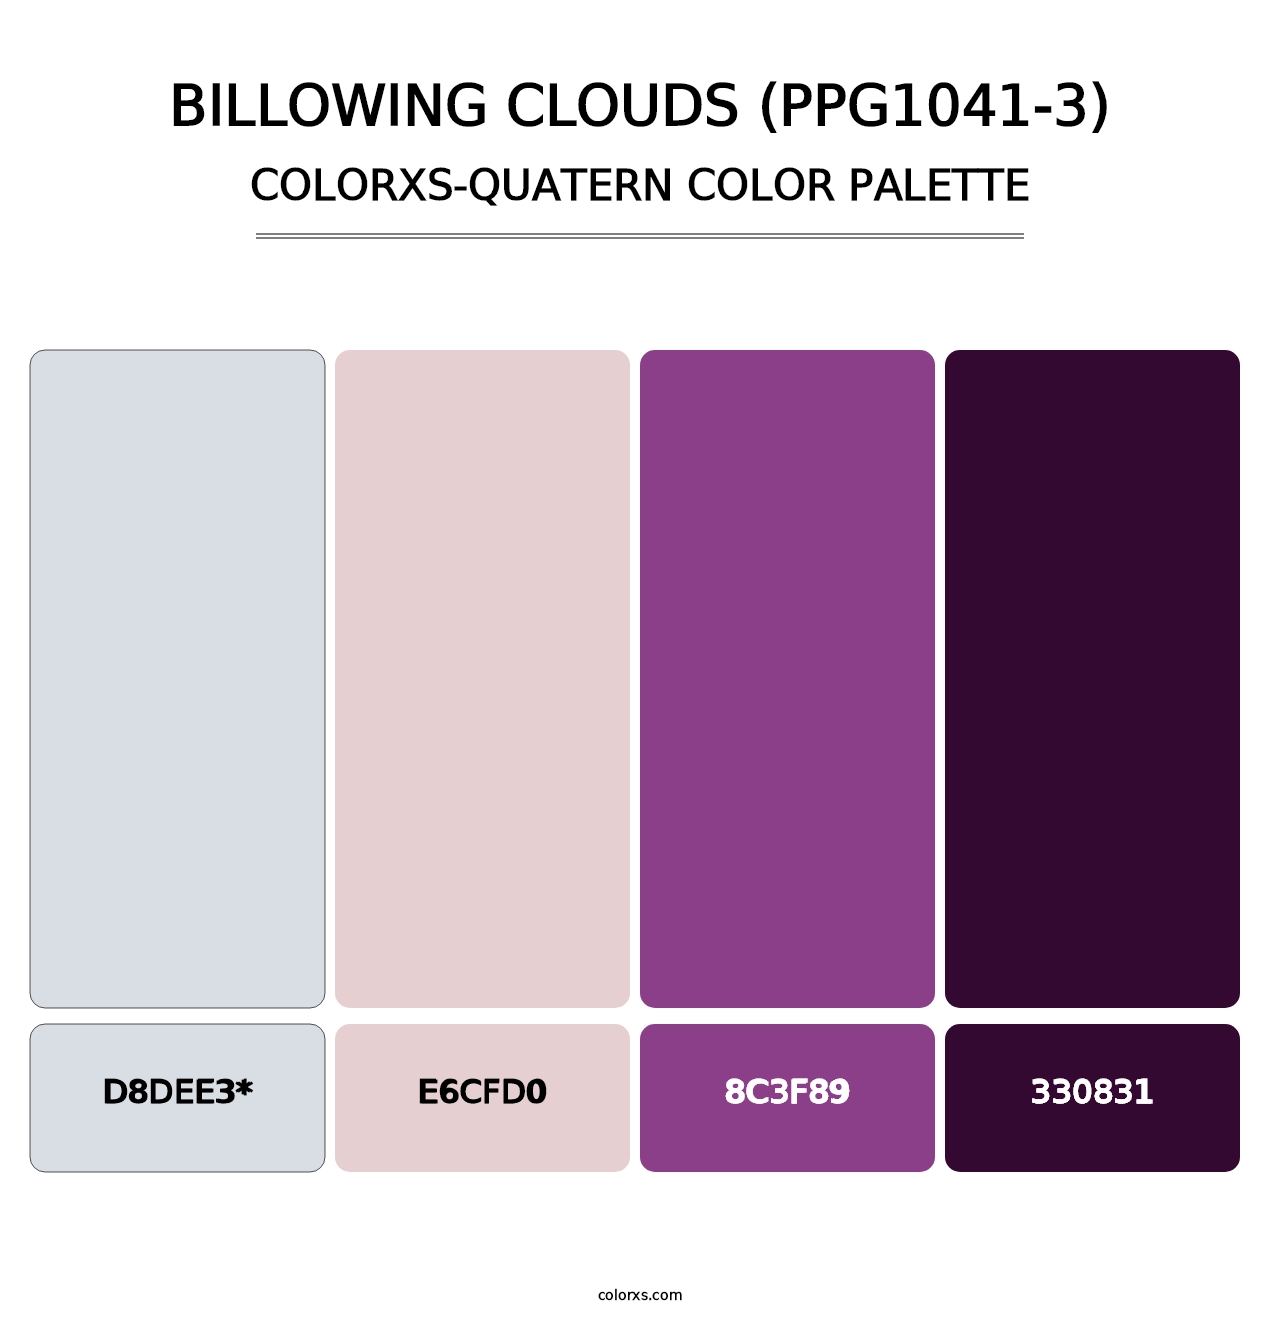 Billowing Clouds (PPG1041-3) - Colorxs Quatern Palette